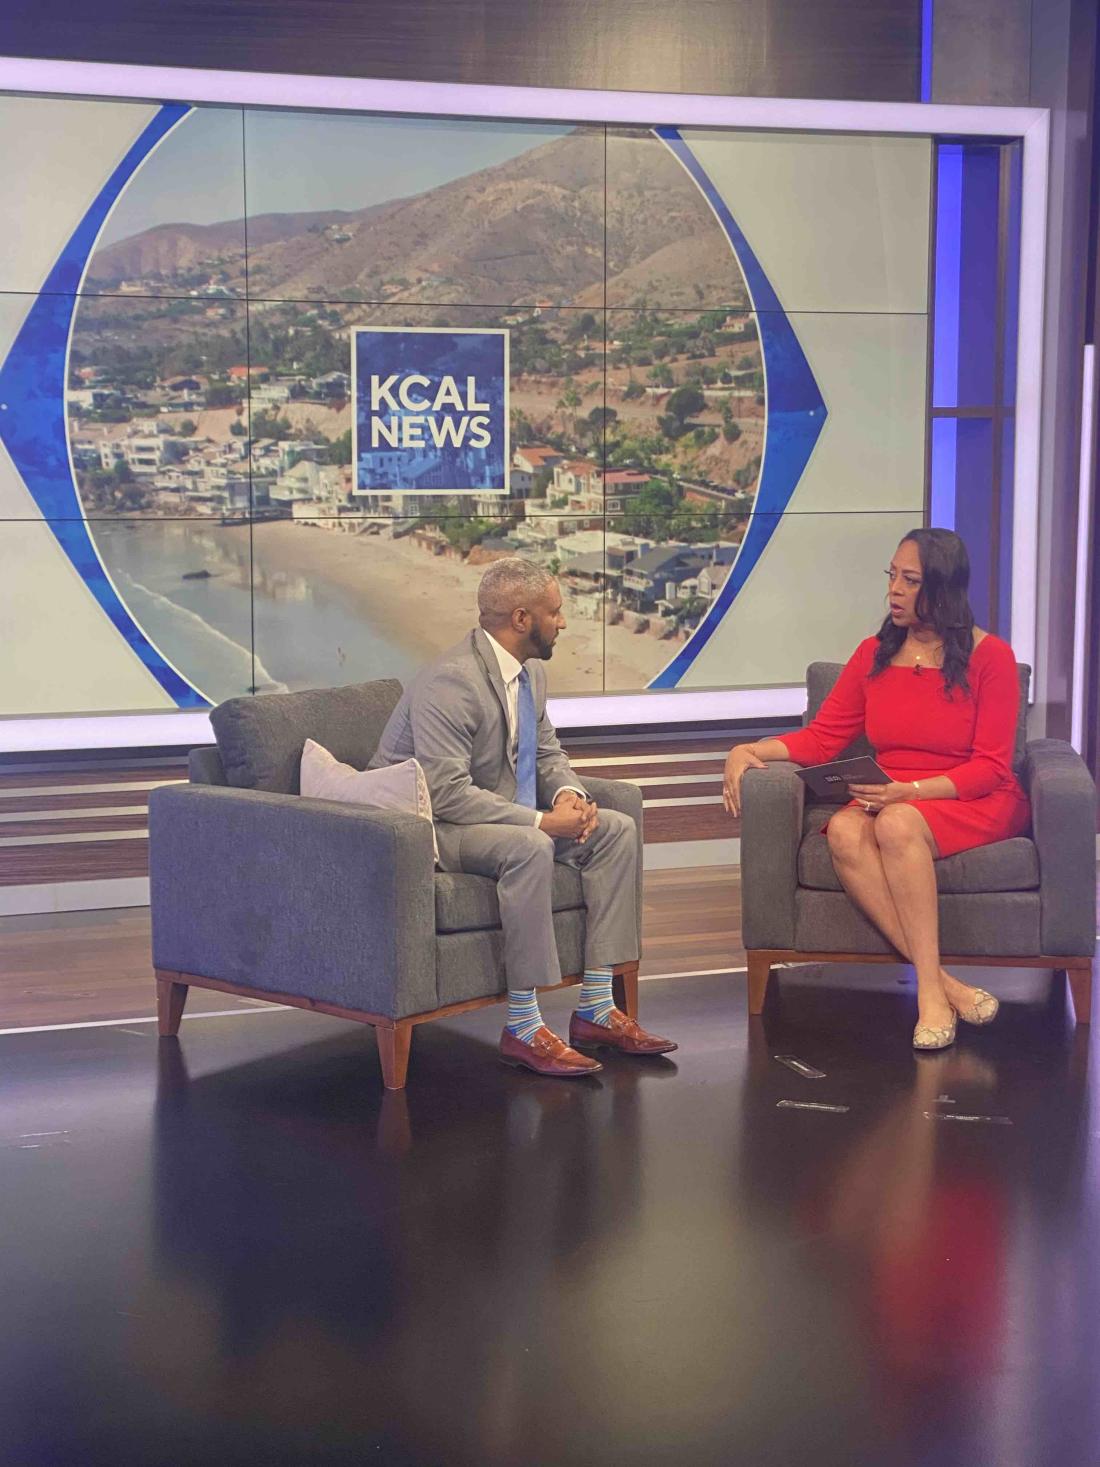  LACC President Amanuel Gebru was interviewed live on KCAL noon news about the Fall Classic Hiring Spree